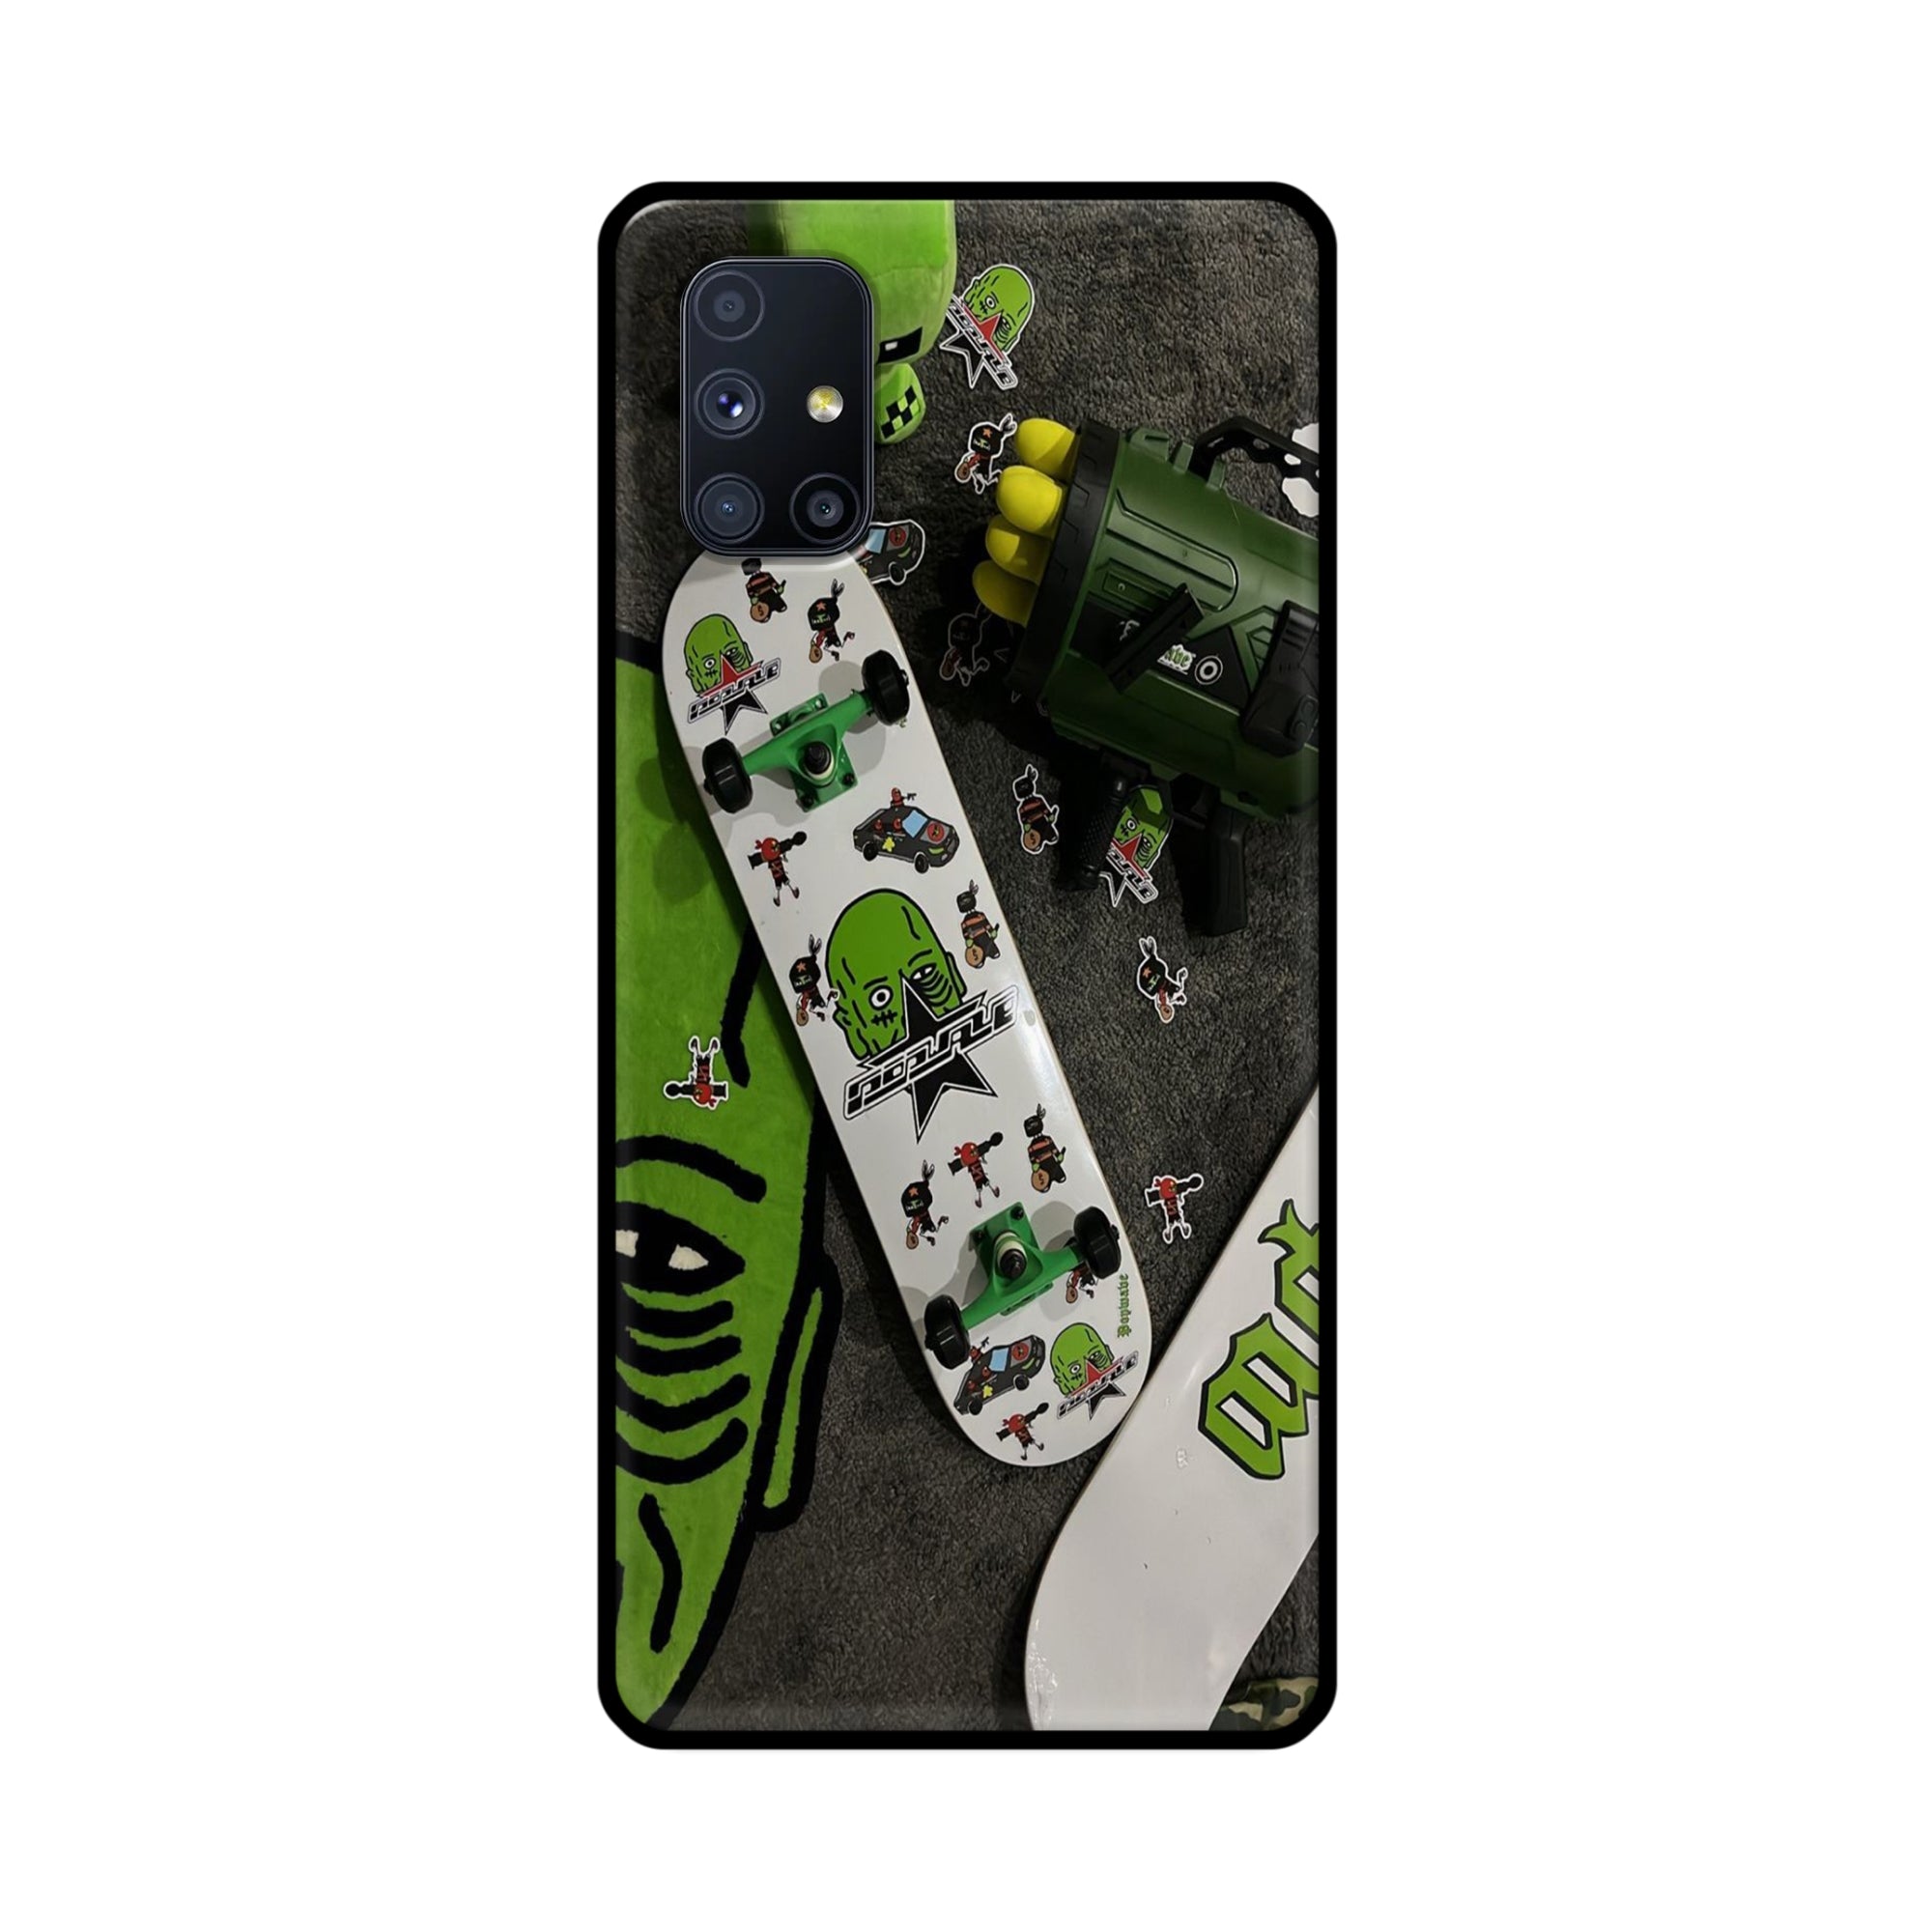 Buy Hulk Skateboard Metal-Silicon Back Mobile Phone Case/Cover For Samsung Galaxy M51 Online